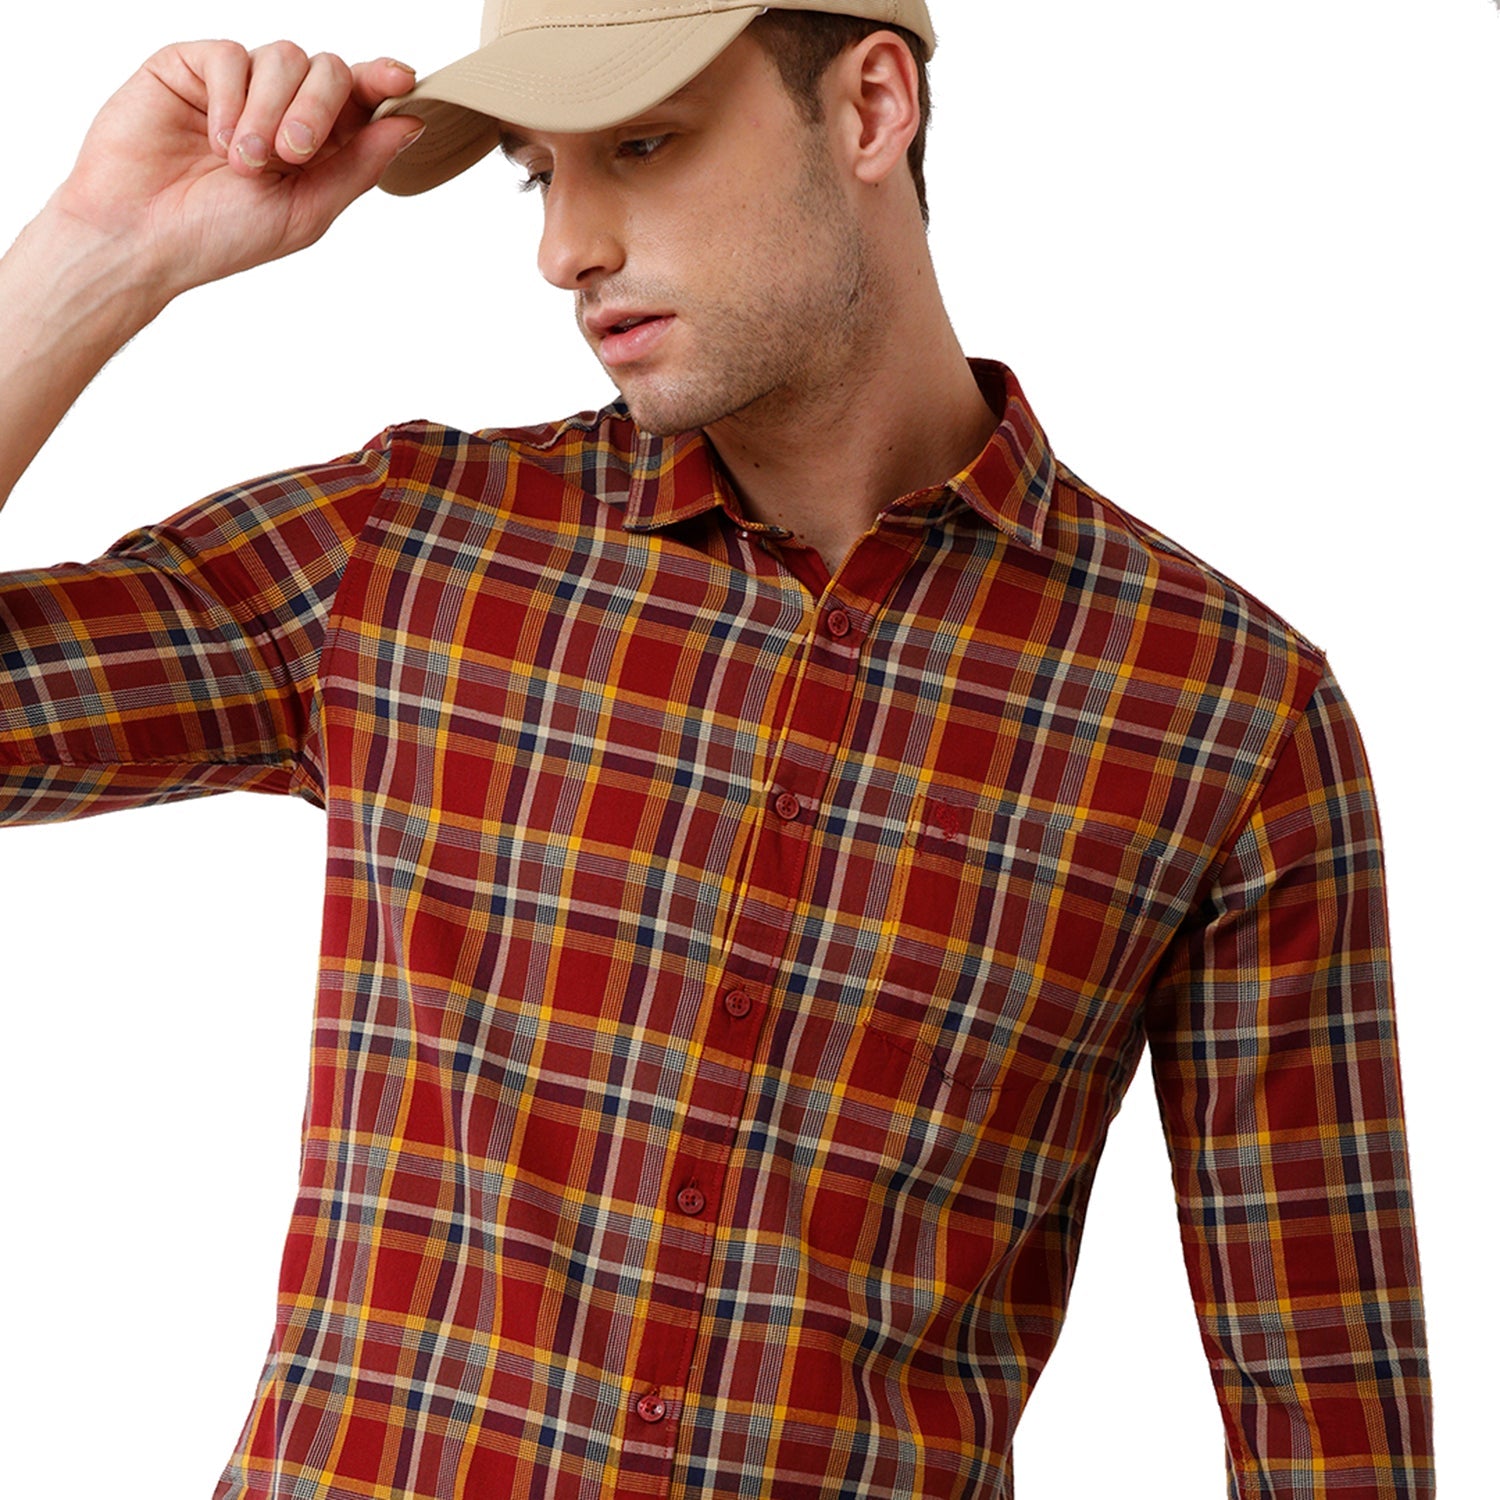 Swiss Club Men's Checked Full Sleeve Slim Fit Multicolor Woven Shirt -SC 117 A Swiss Club 